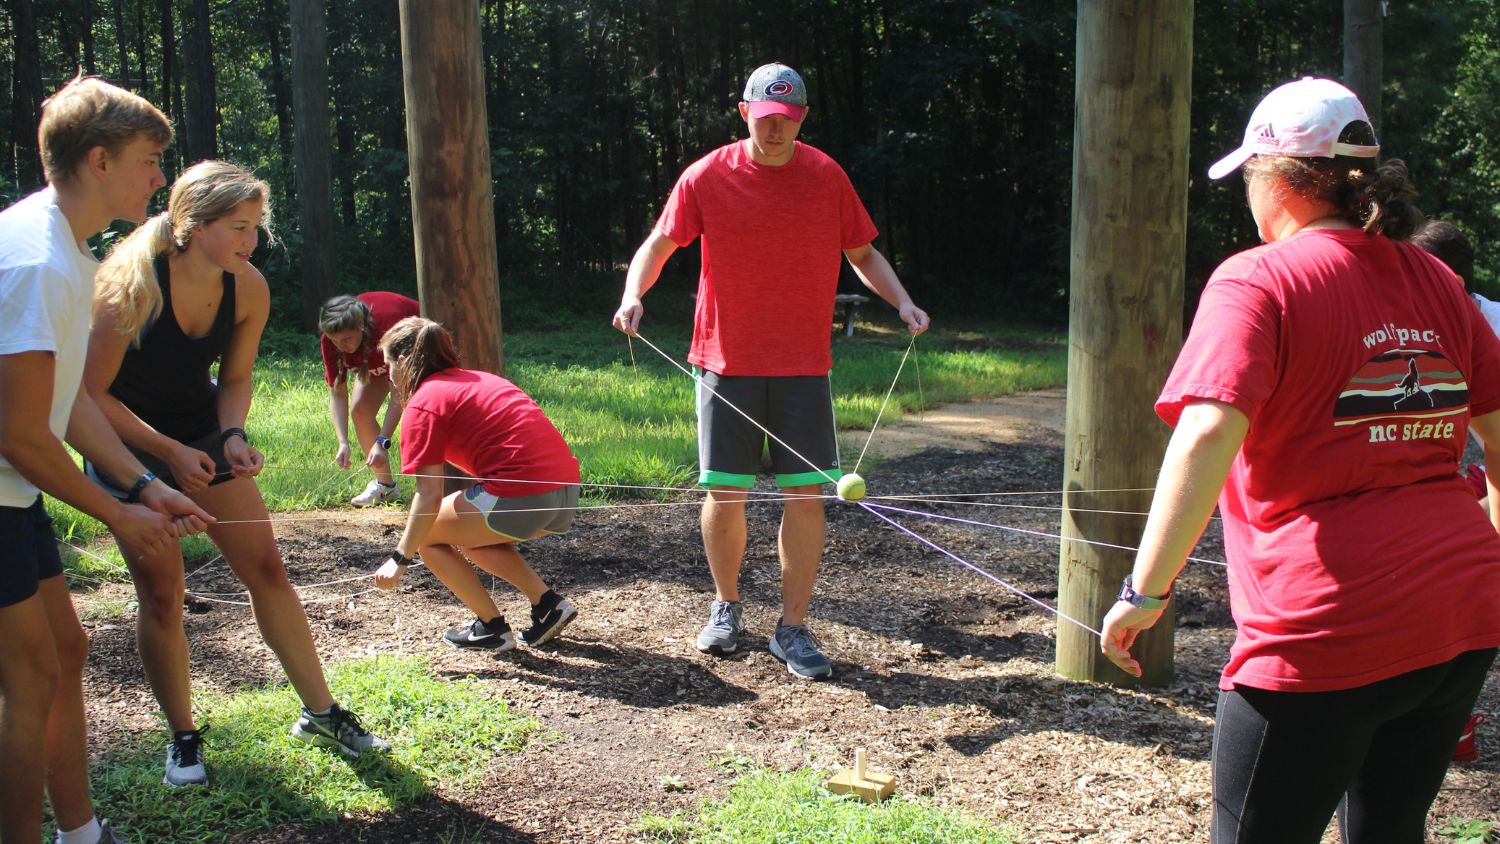 group participating in a low ropes course activitiy